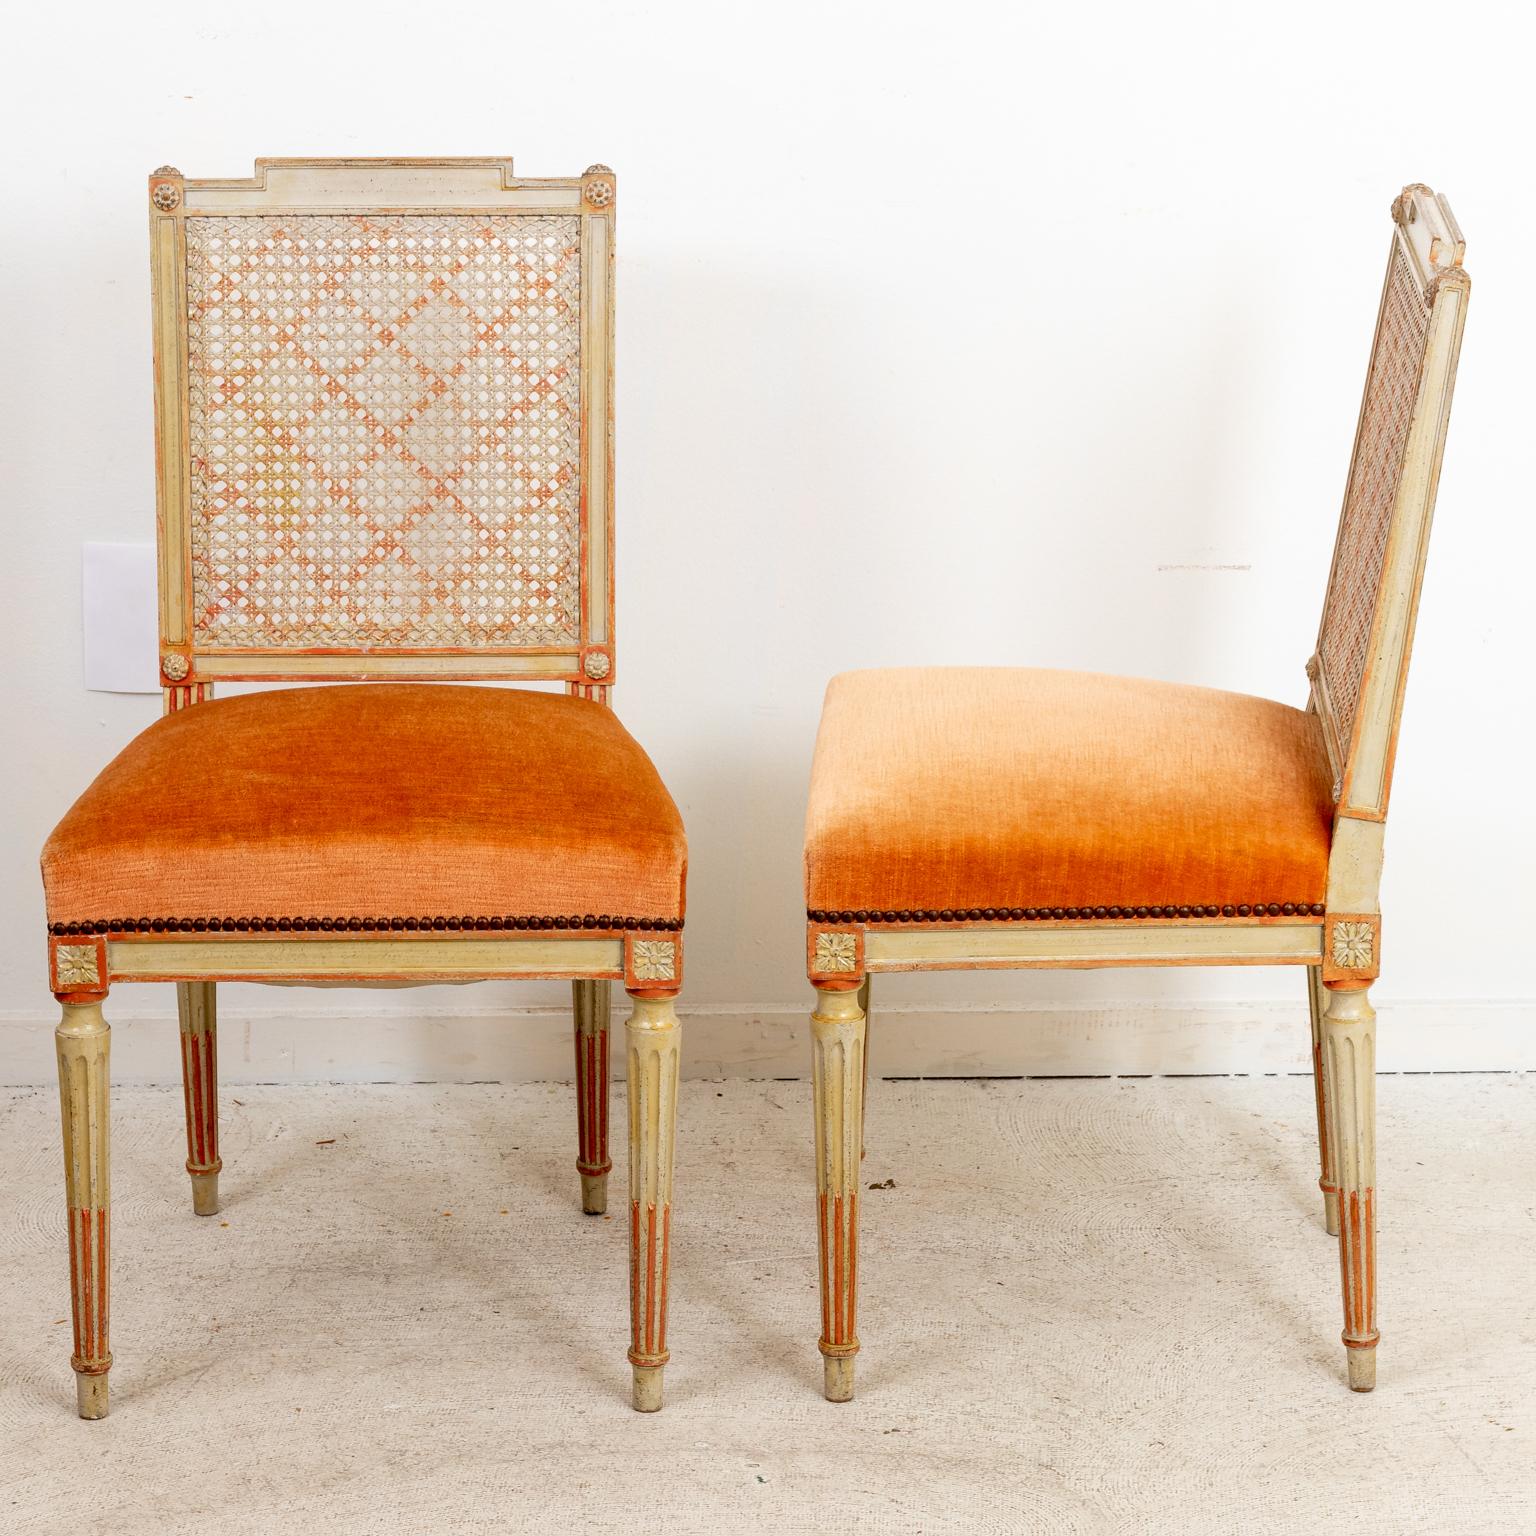 20th Century Set of Four Caned and Painted Side Chairs